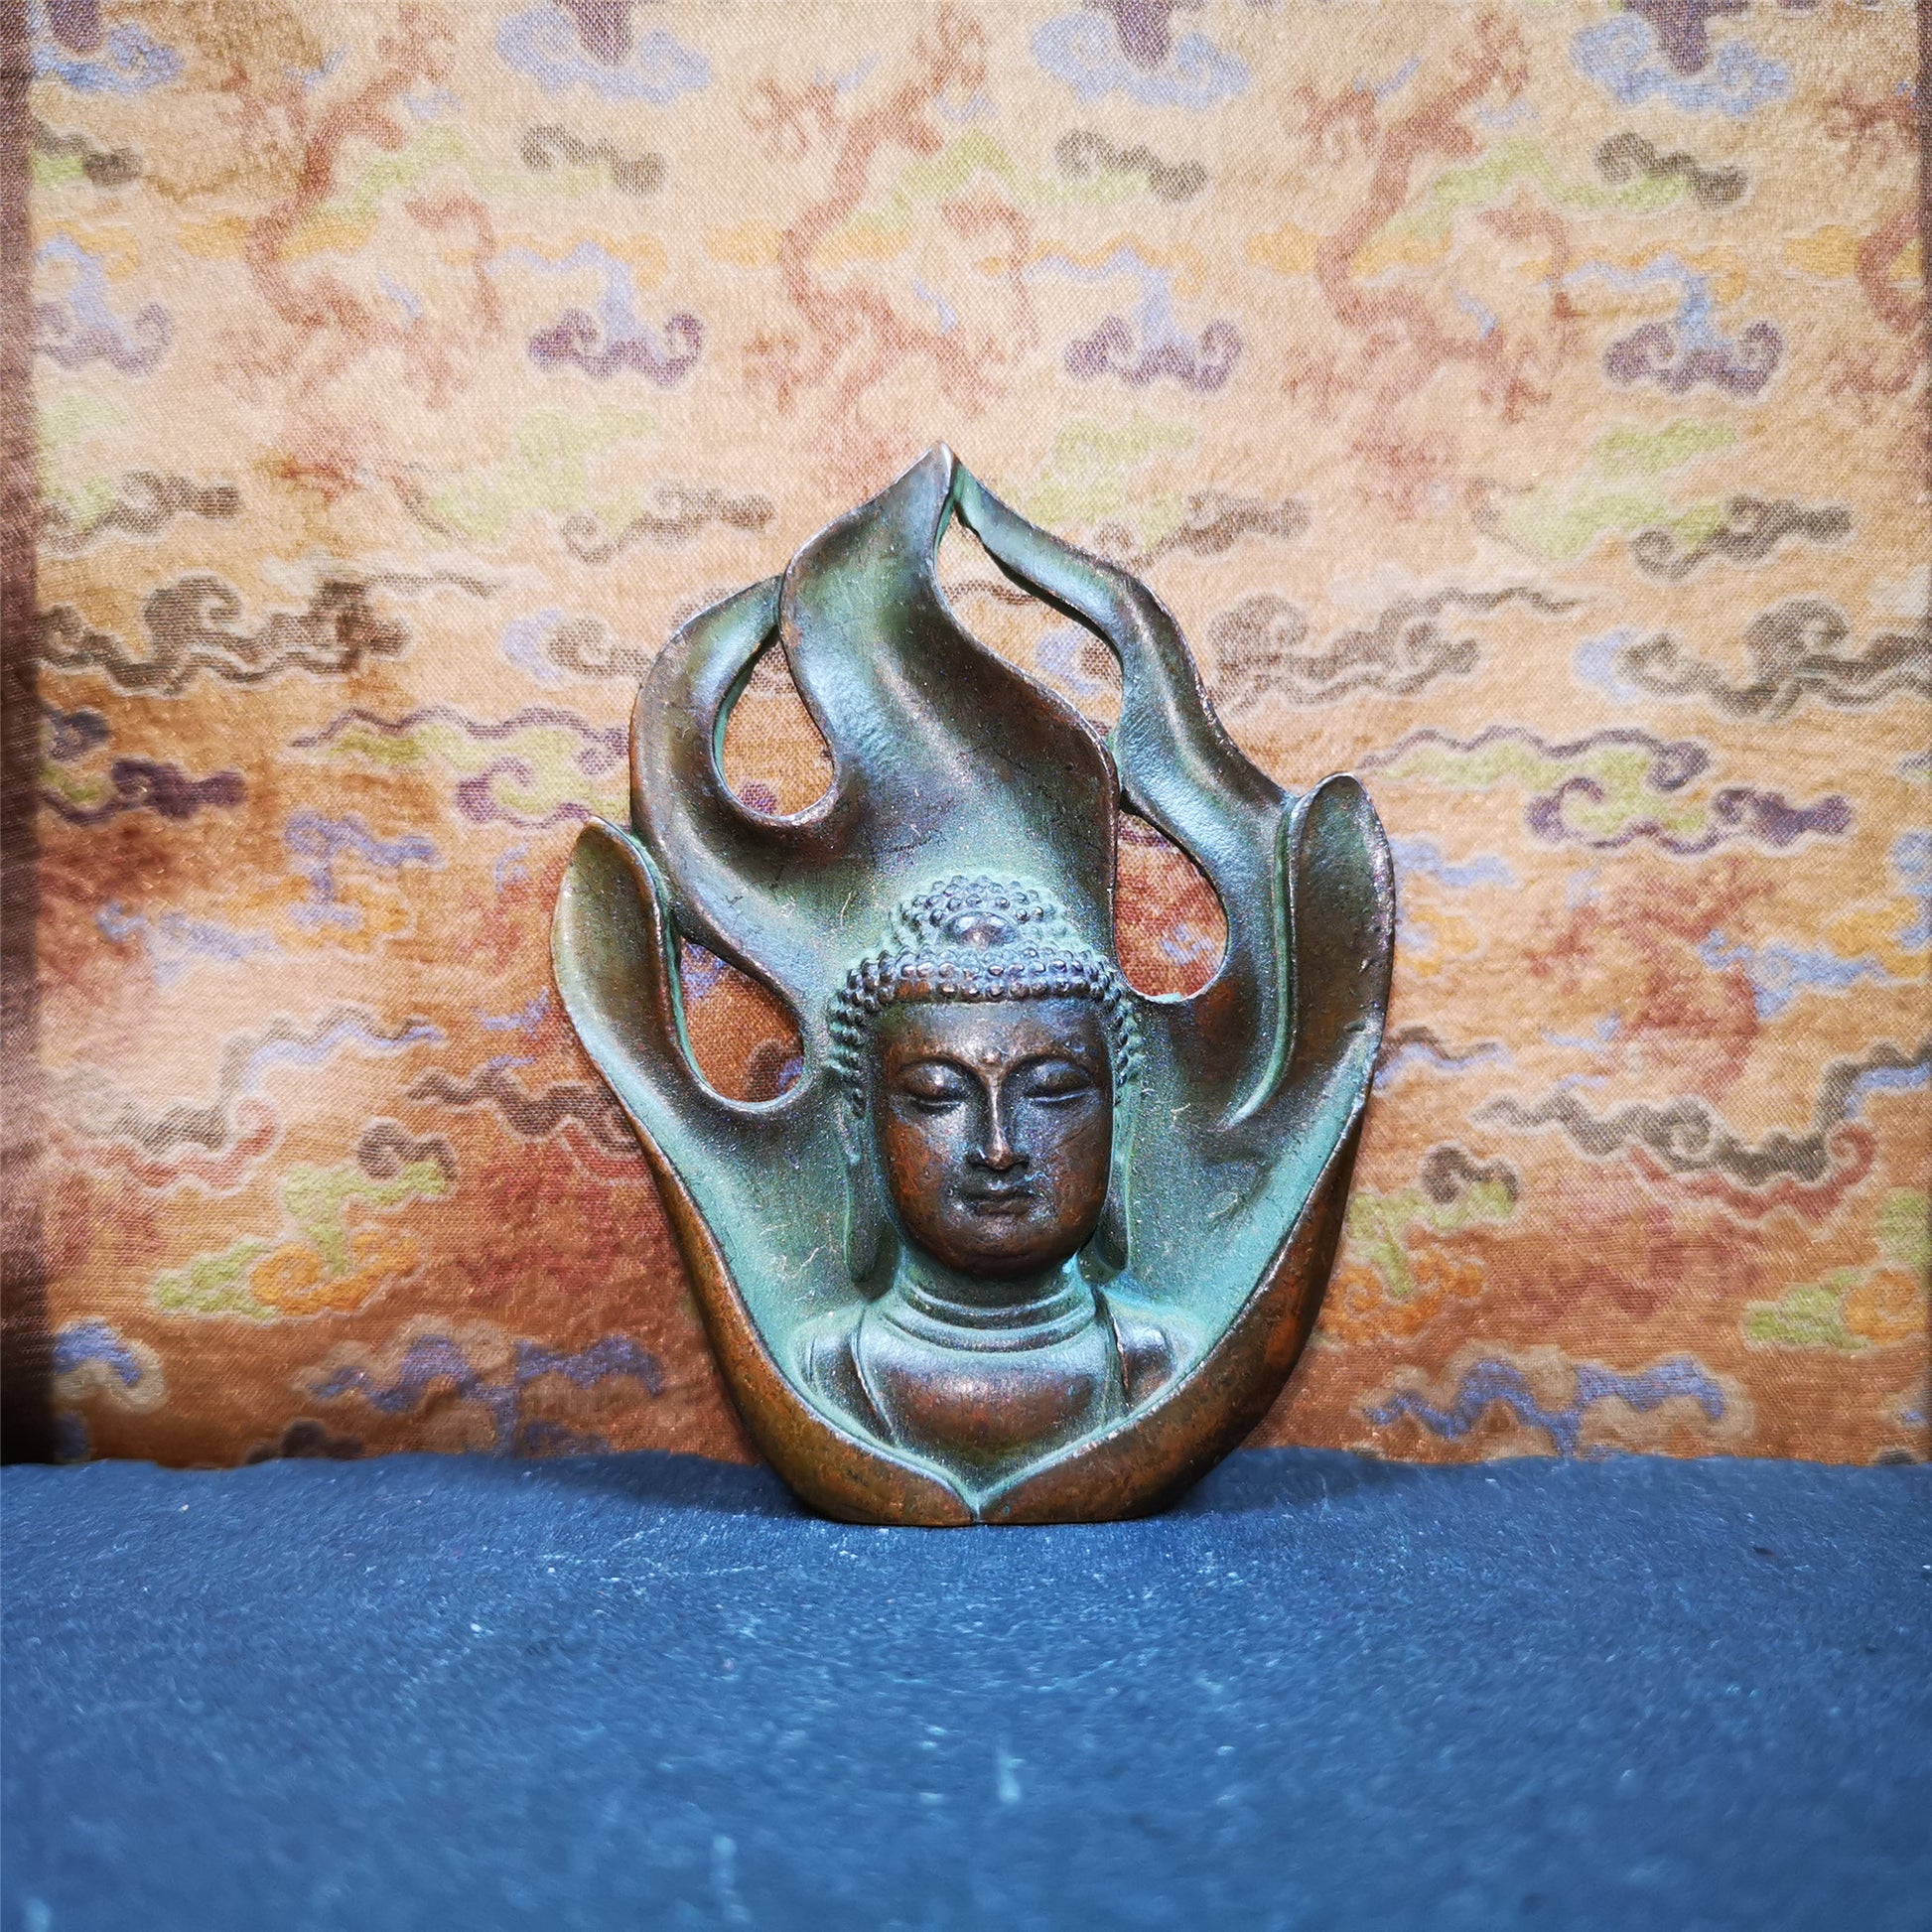 This shakyamuni statue was handmade from Baiyu Tibet. It is made of copper,the flame surrounds shakyamuni,the height is 2.9 inches,width is 1.85 inches.